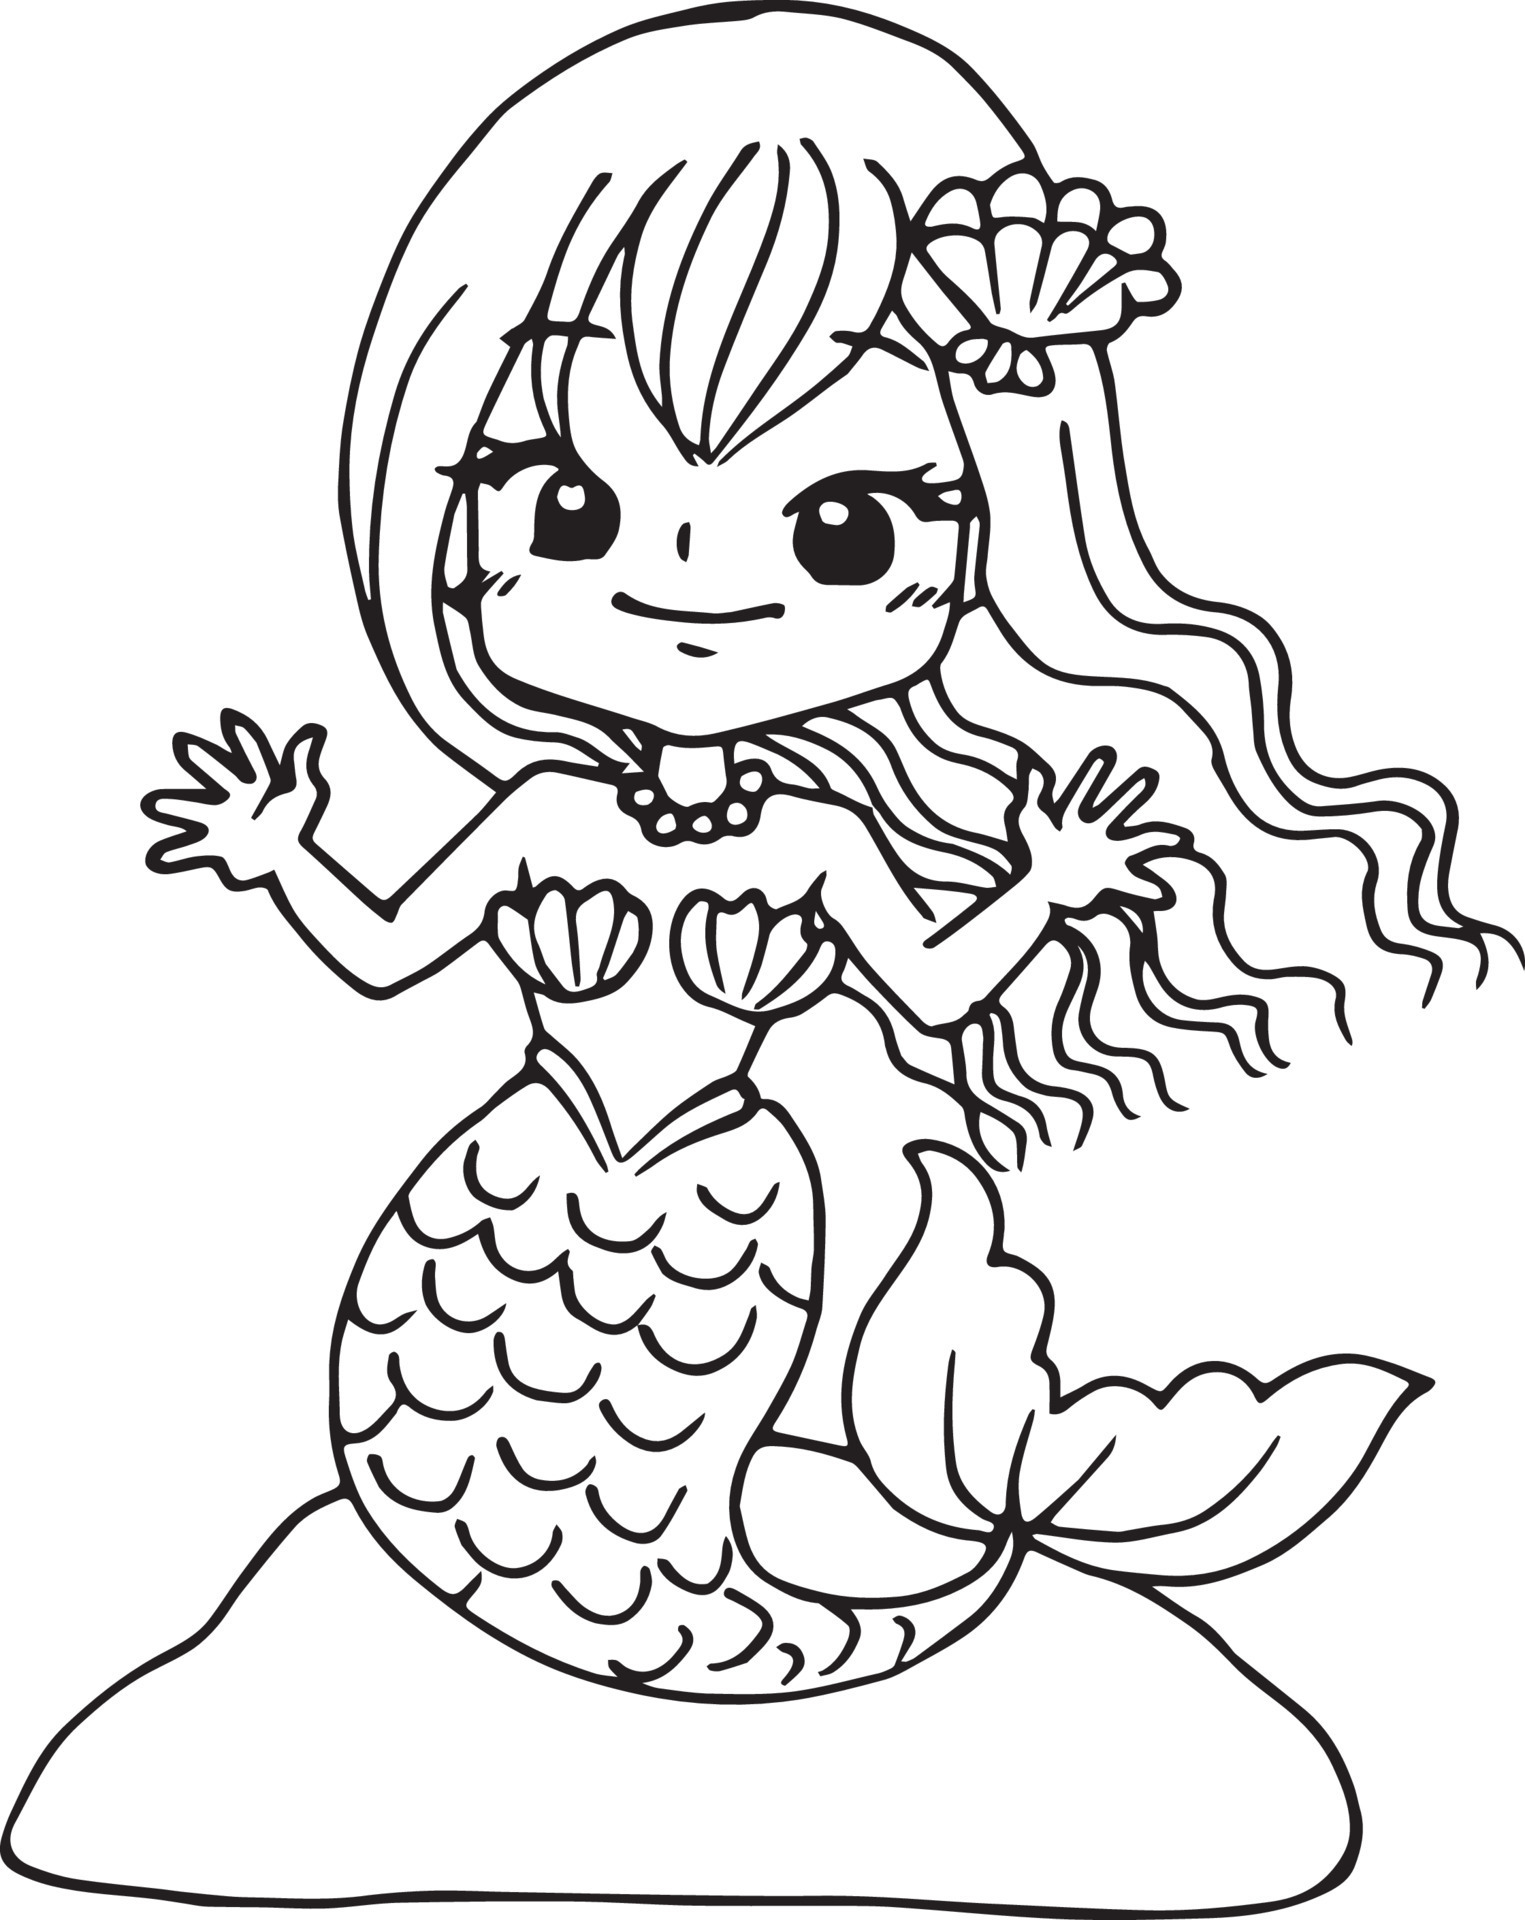 Realistic Anime Mermaid Coloring Pages  Mermaid Melody Line Art HD Png  Download  900x6752458407  PngFind